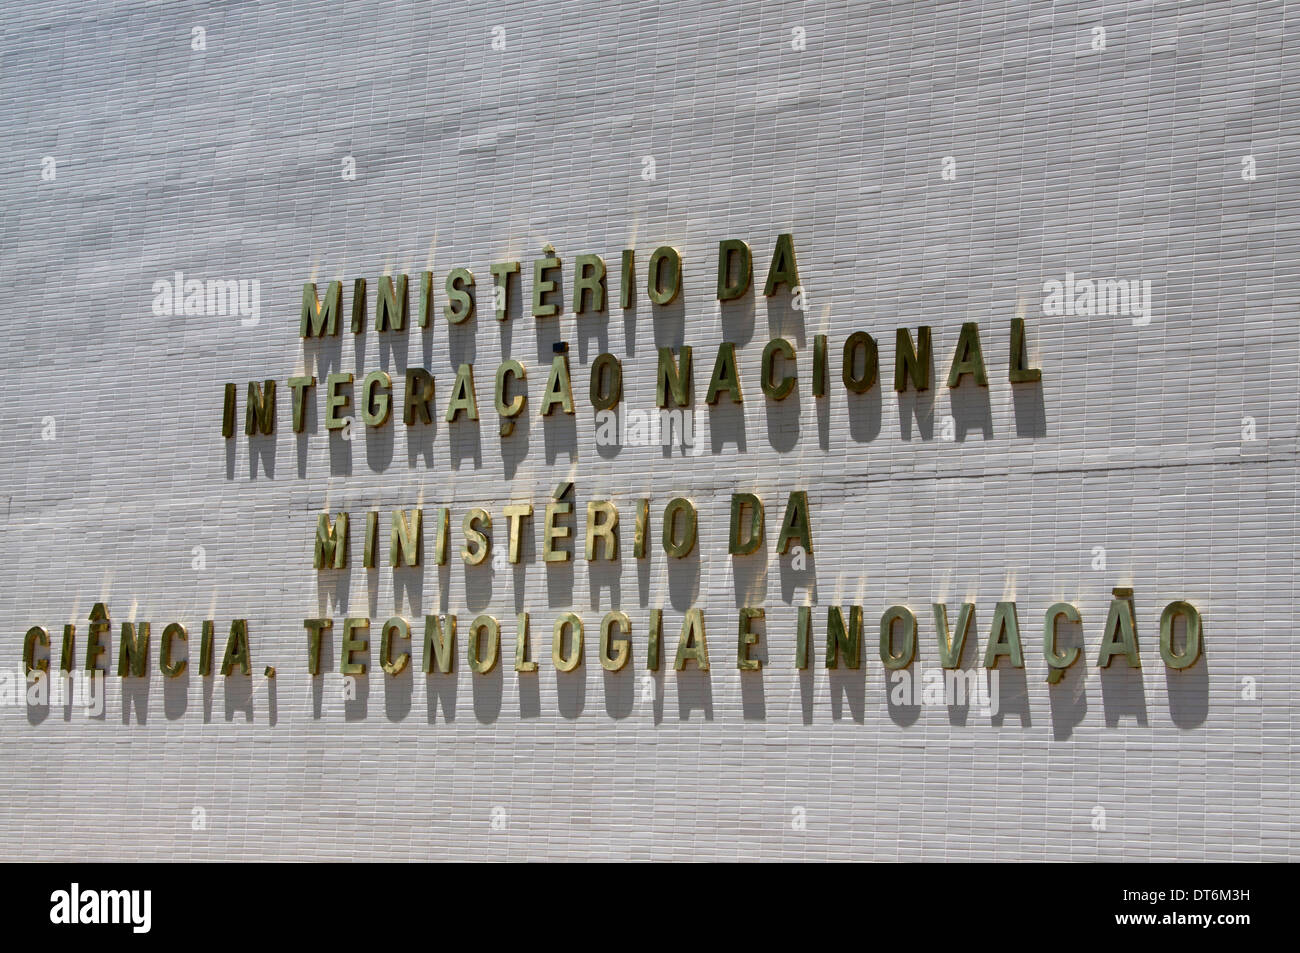 Ministry of National Integration & Ministry of Science and Technology Esplanada dos Ministerios, Brasilia, Brazil Stock Photo